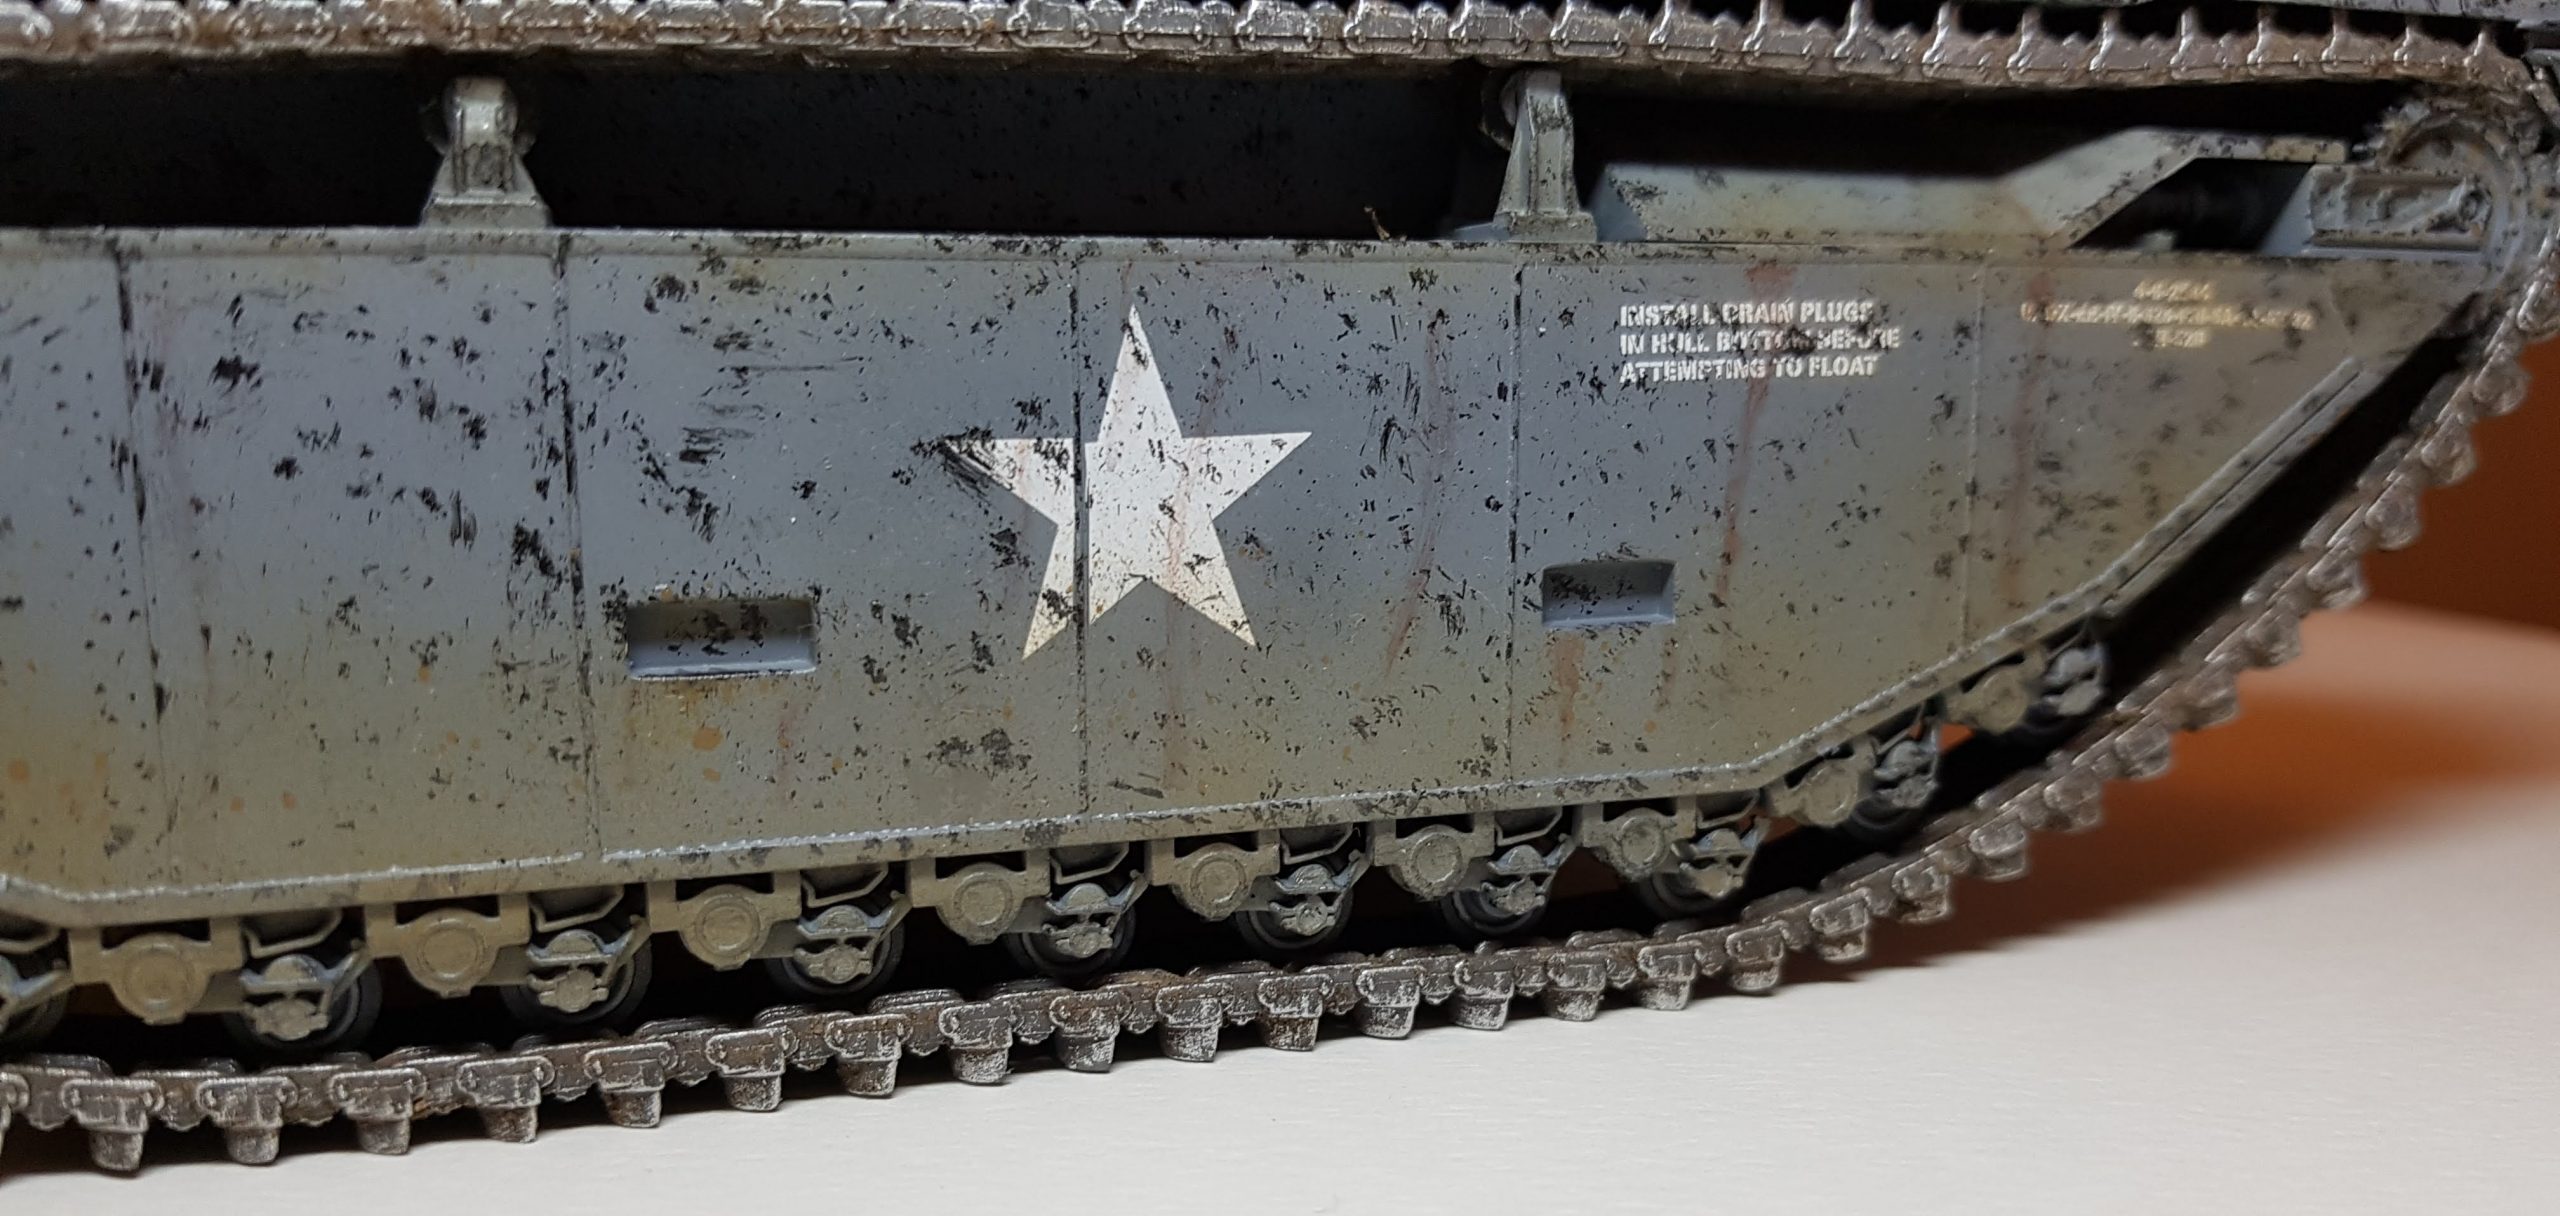 LVT-2 Amtrac (WW2) - View 3 - 1/35 Scale - Built By Wright Built - Italeri